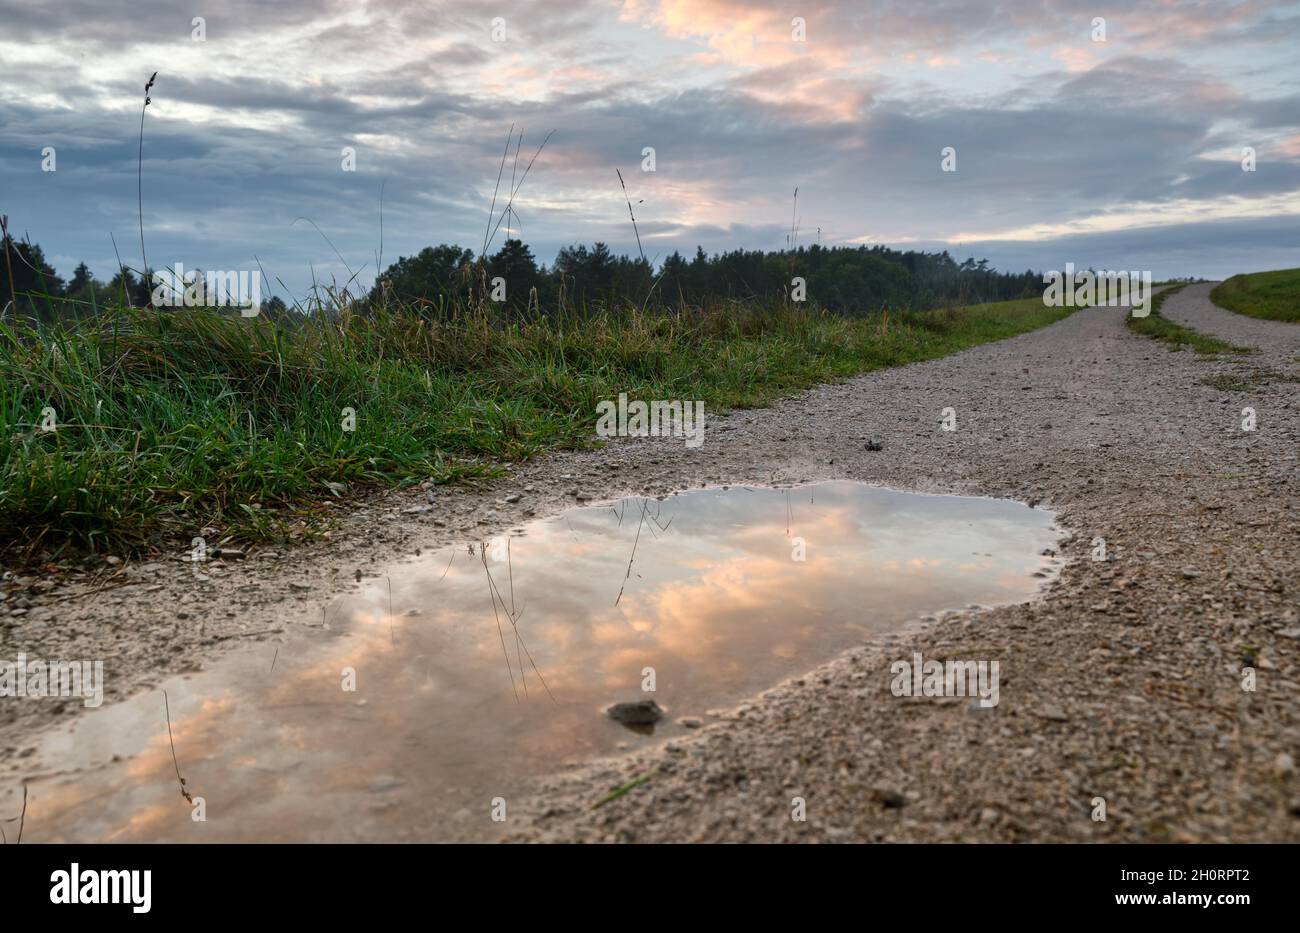 Reflections of a sunset sky in a rain puddle on a gravel road in rural landscape. Seen in Germany in October Stock Photo